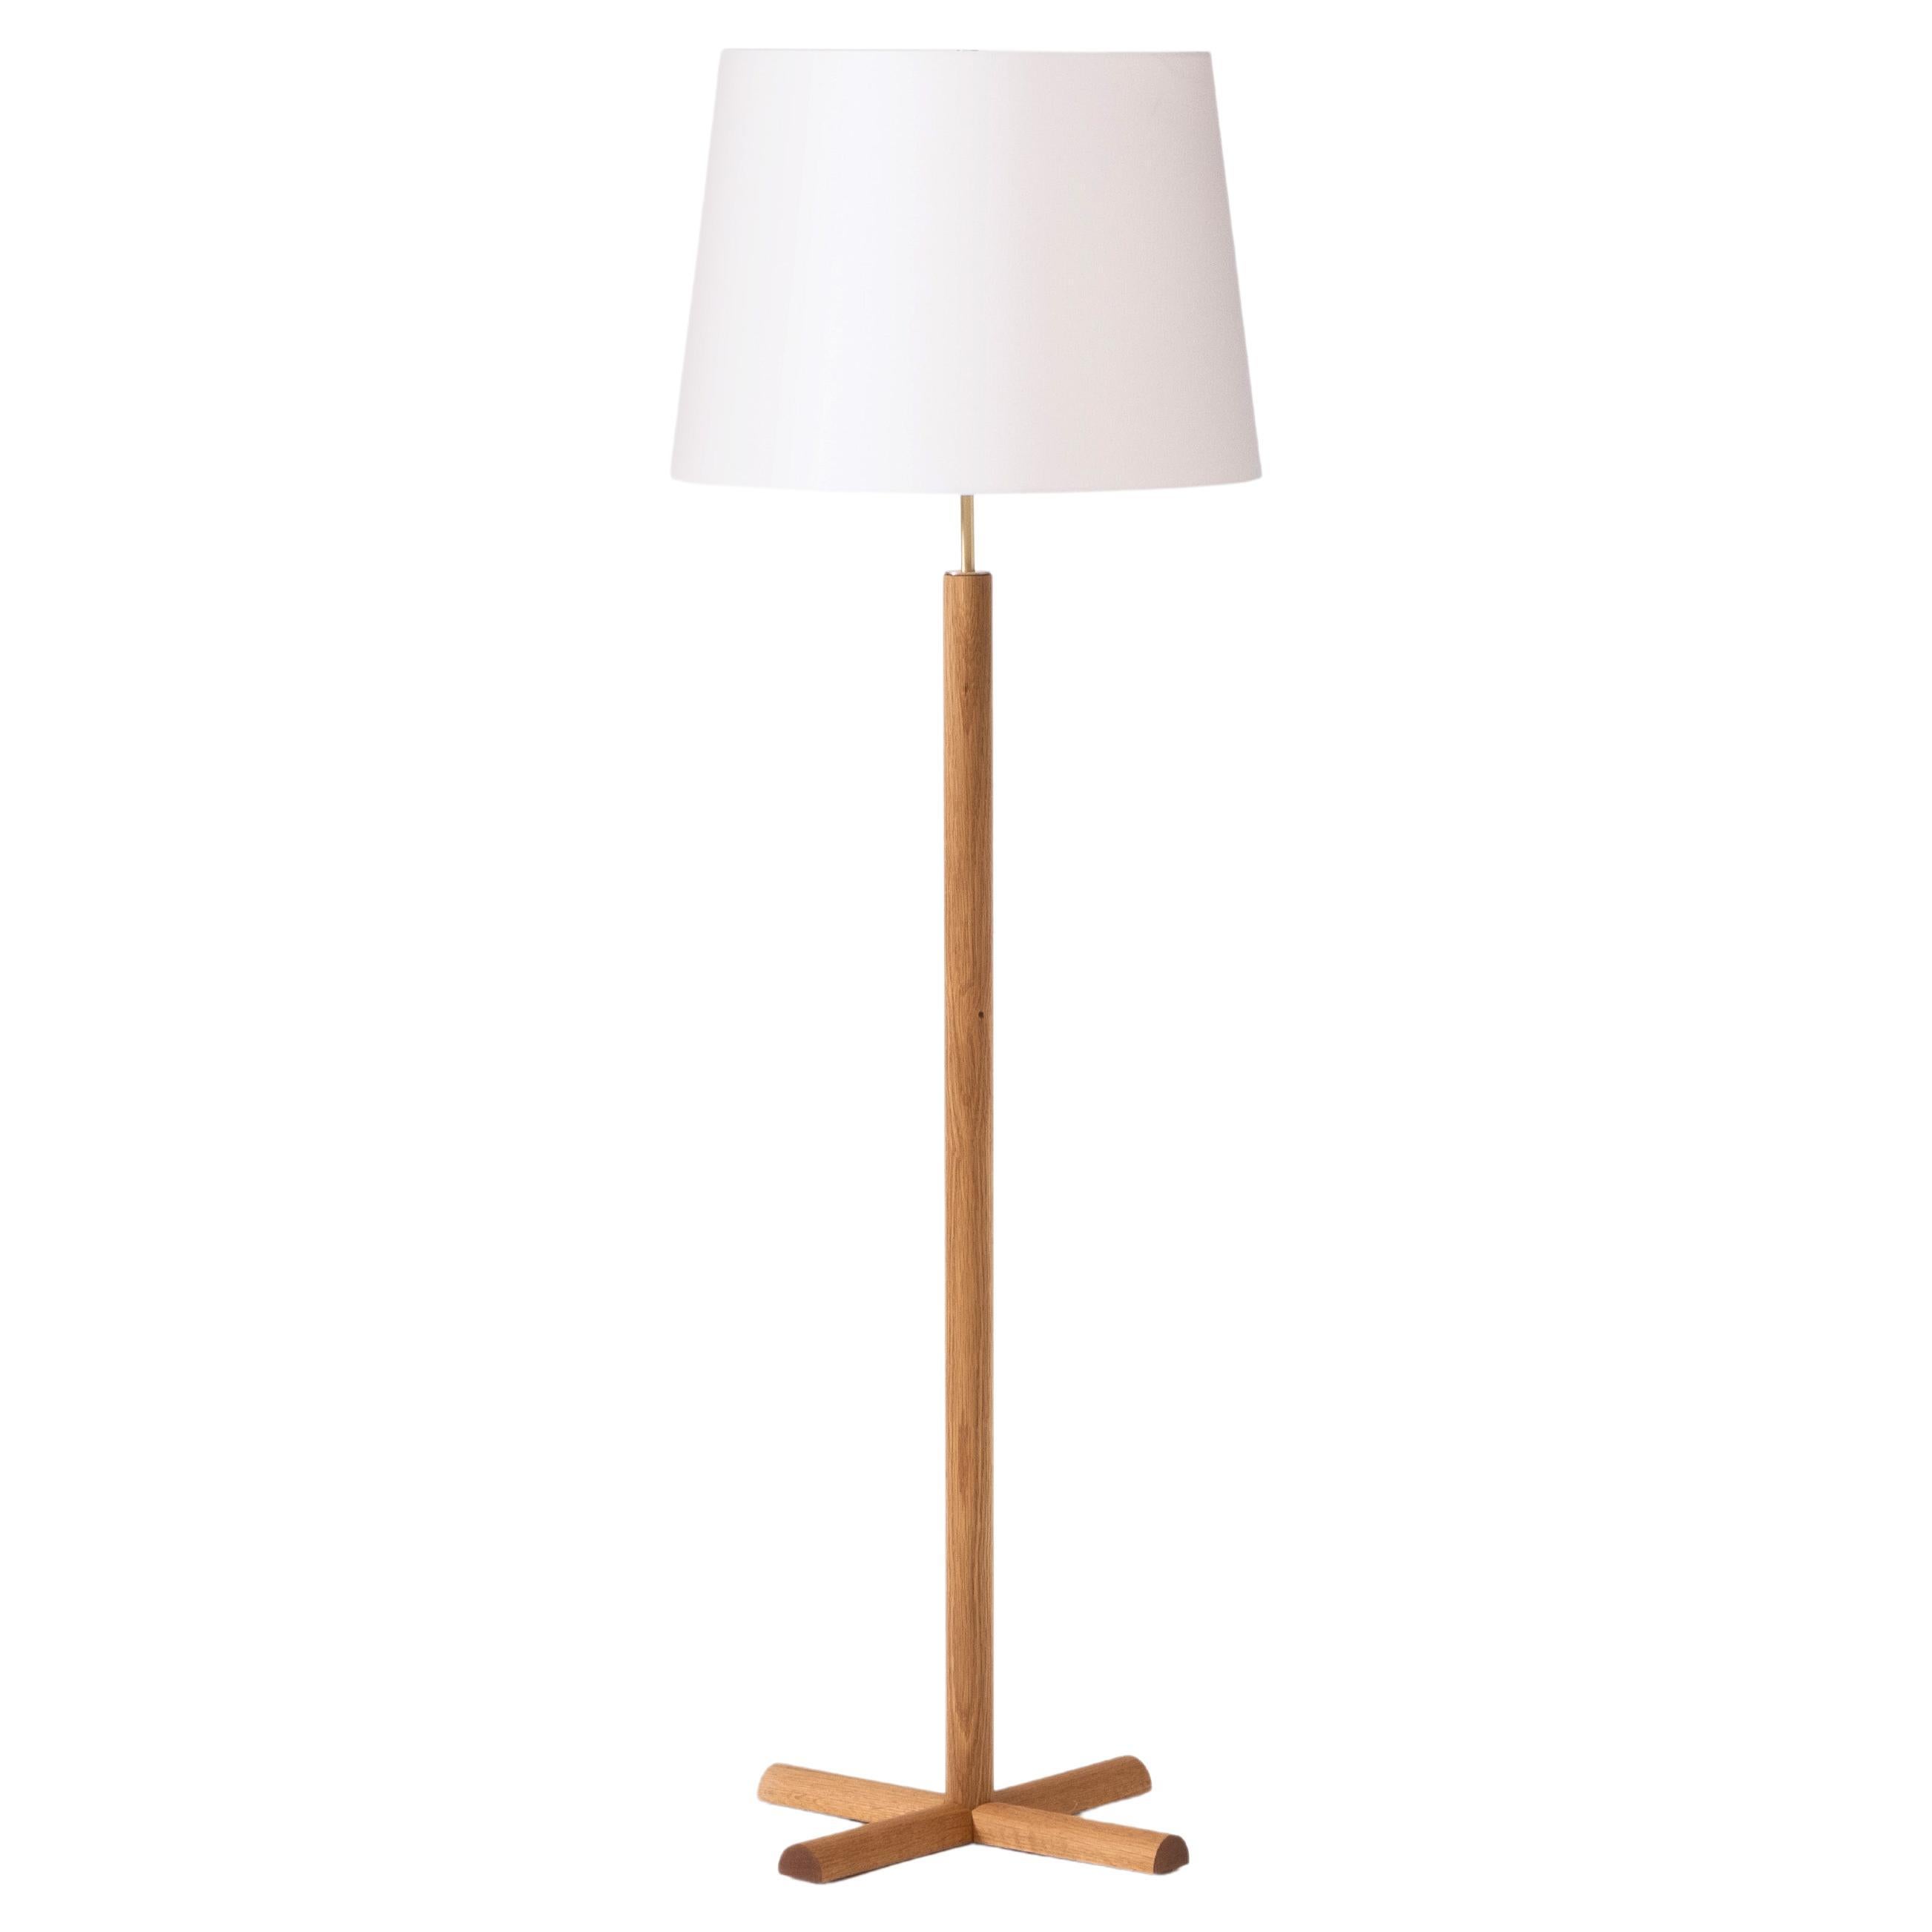 Modern Floor Lamp with White Oak Column Base and Conical Shade